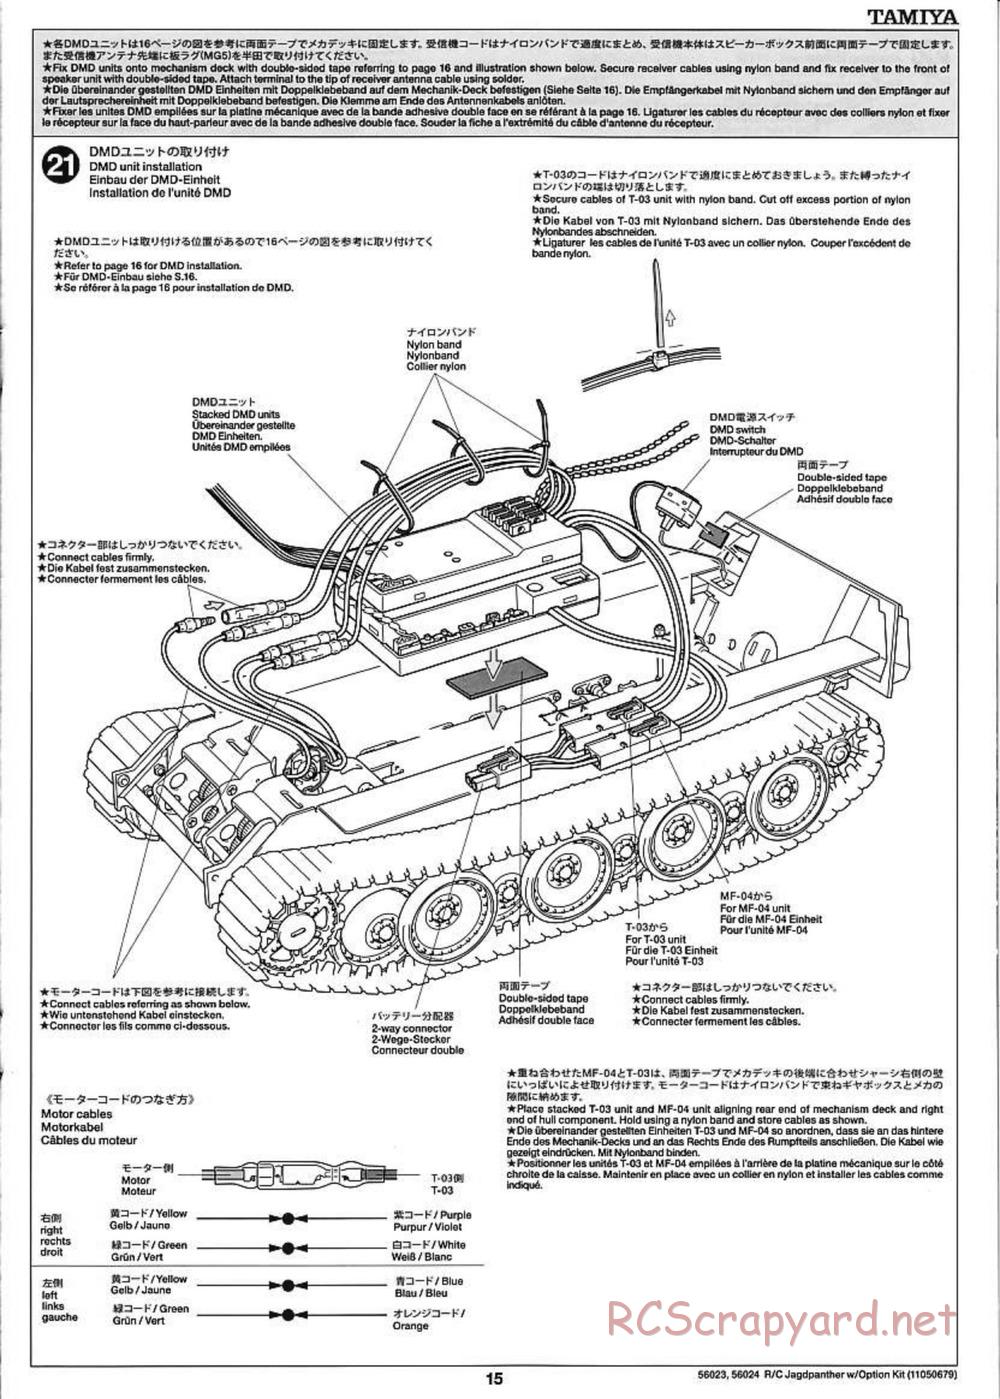 Tamiya - Jagdpanther - 1/16 Scale Chassis - Manual - Page 15